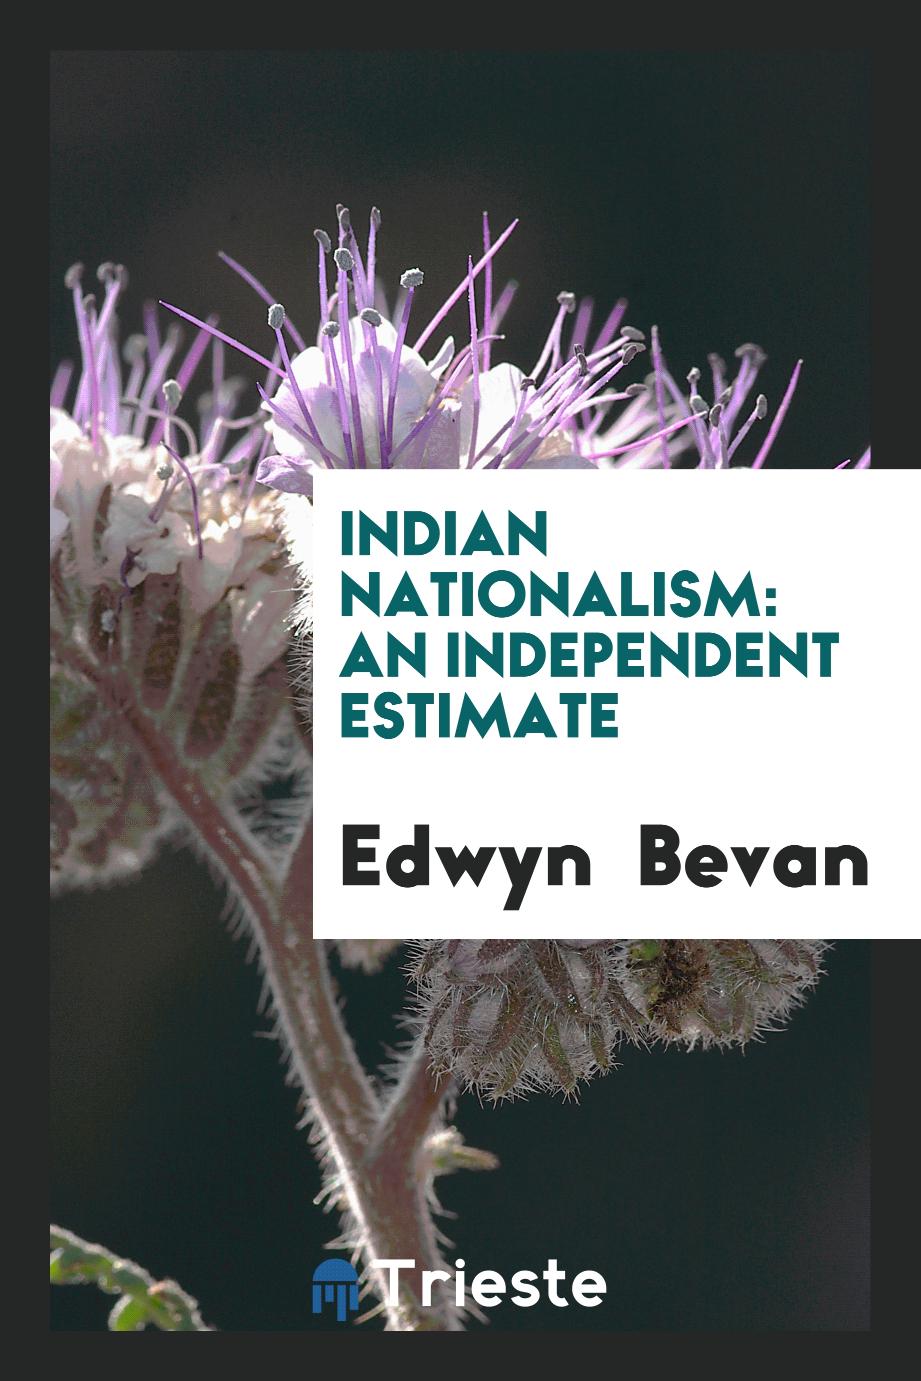 Indian Nationalism: An Independent Estimate